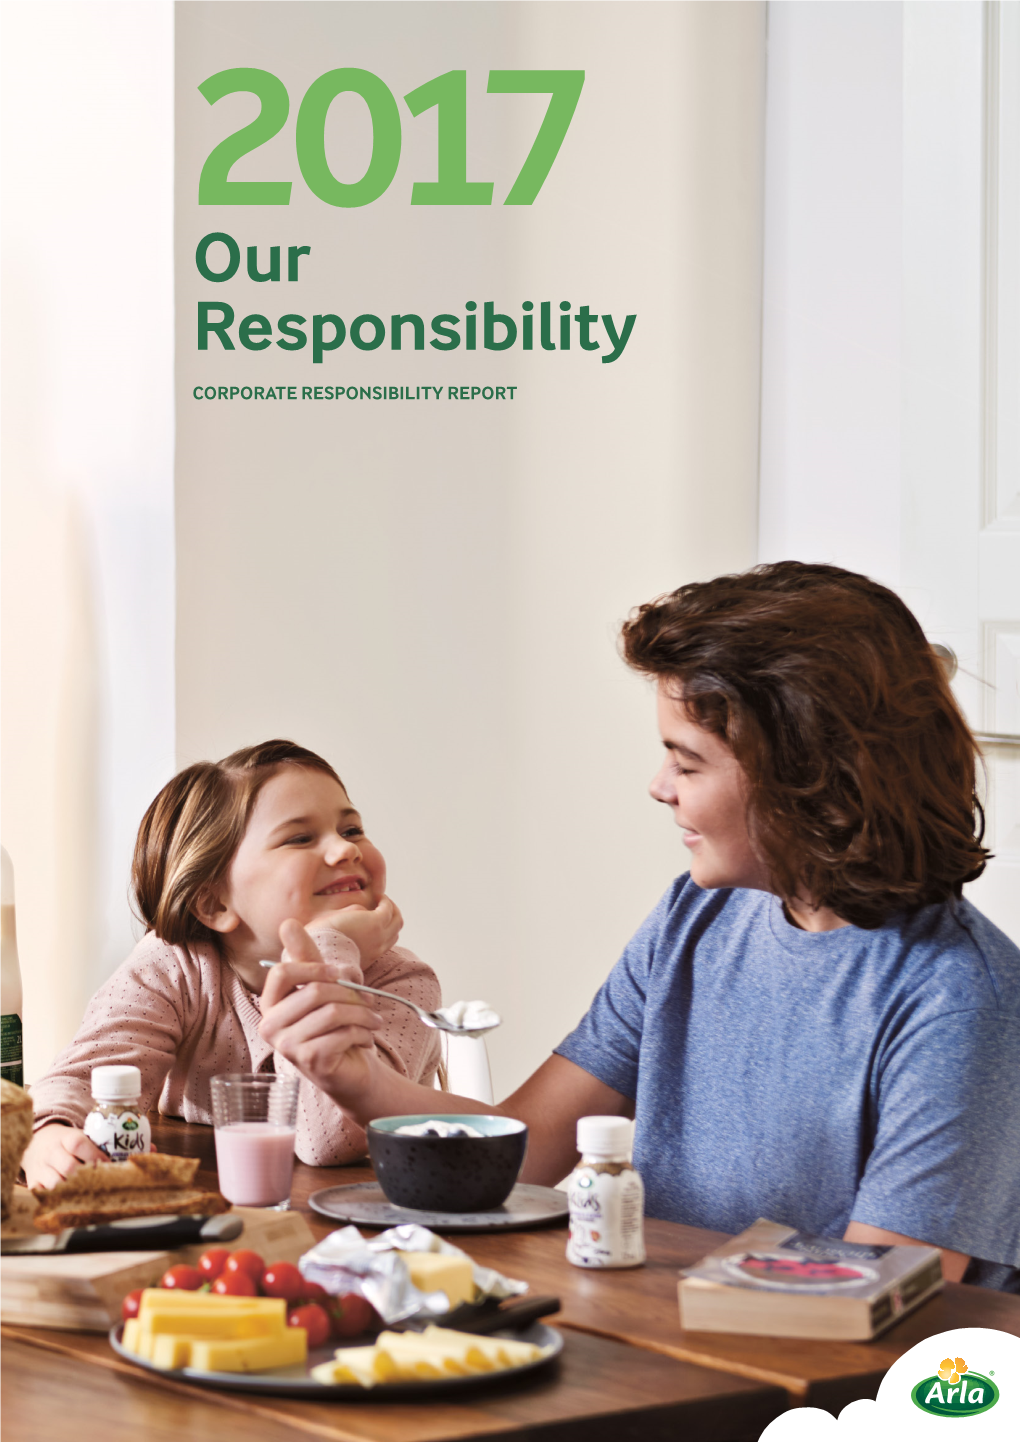 Our Responsibility CORPORATE RESPONSIBILITY REPORT Arla Foods Is a Global Dairy Company Owned by More Than 11,200 Dairy Farmers in Seven European Countries